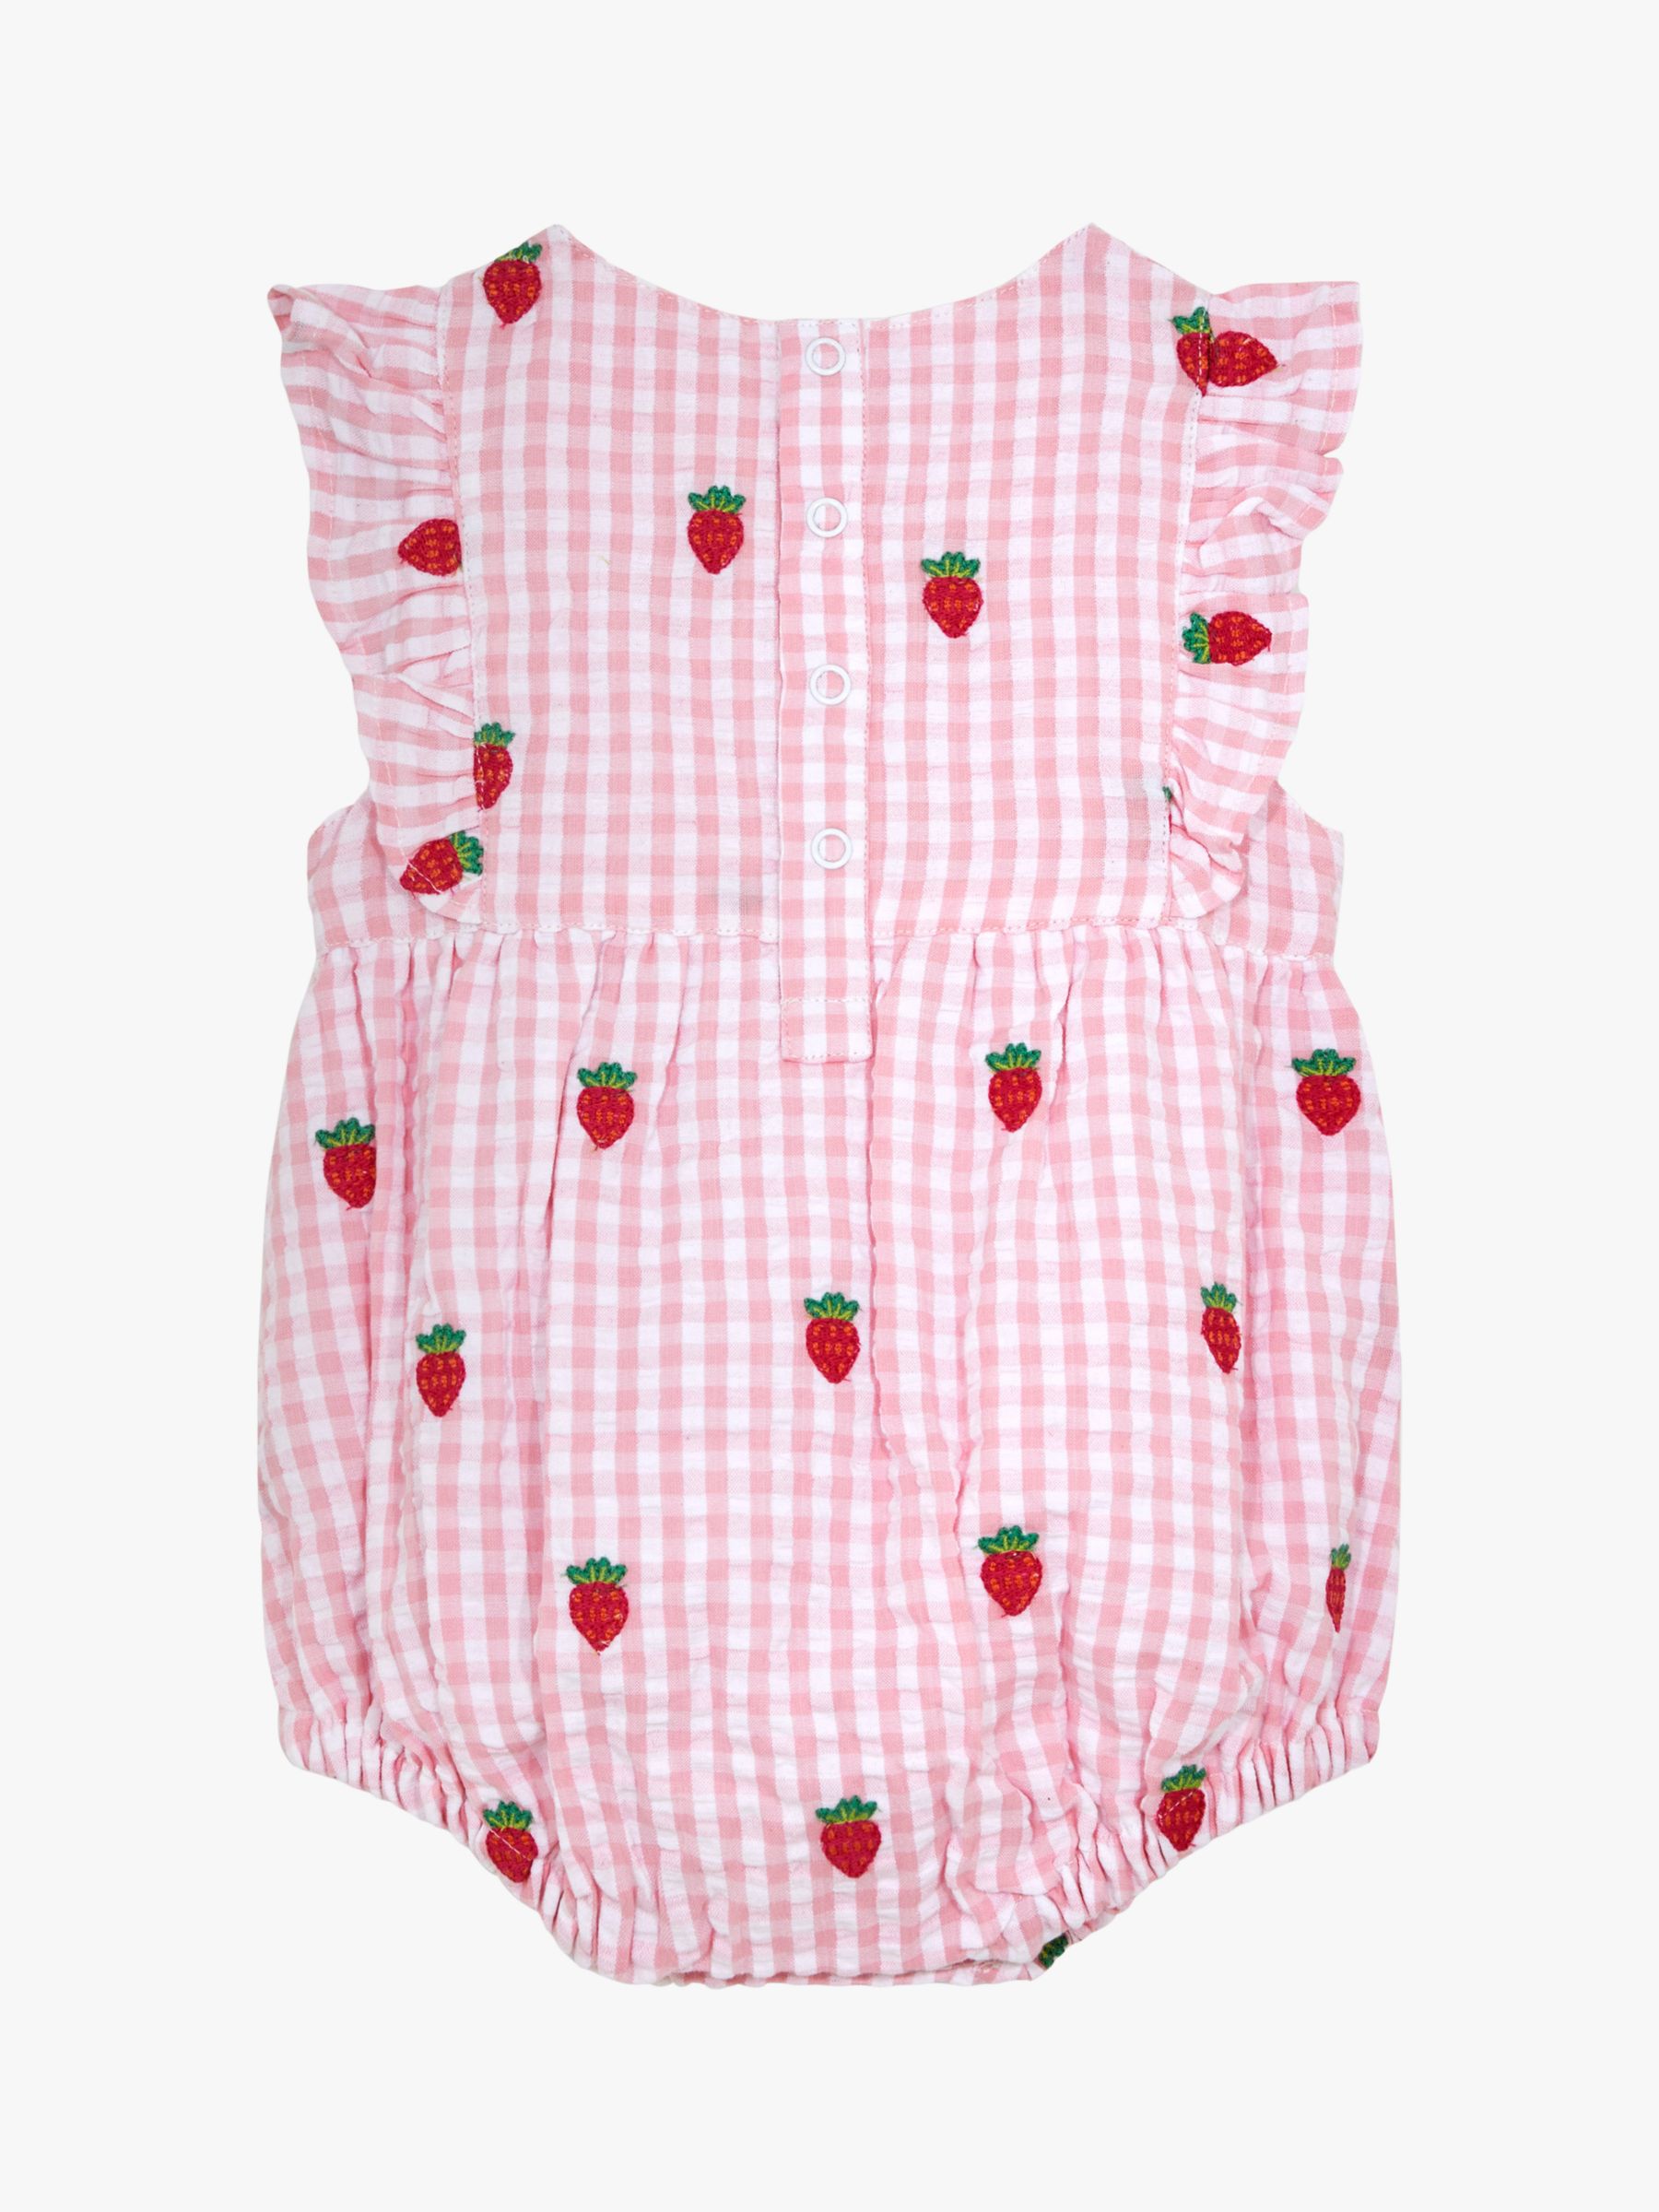 JoJo Maman Bébé Baby Bubble Strawberry Embroidered Gingham Romper & Hat Set, Pink/Multi, 3-6 months